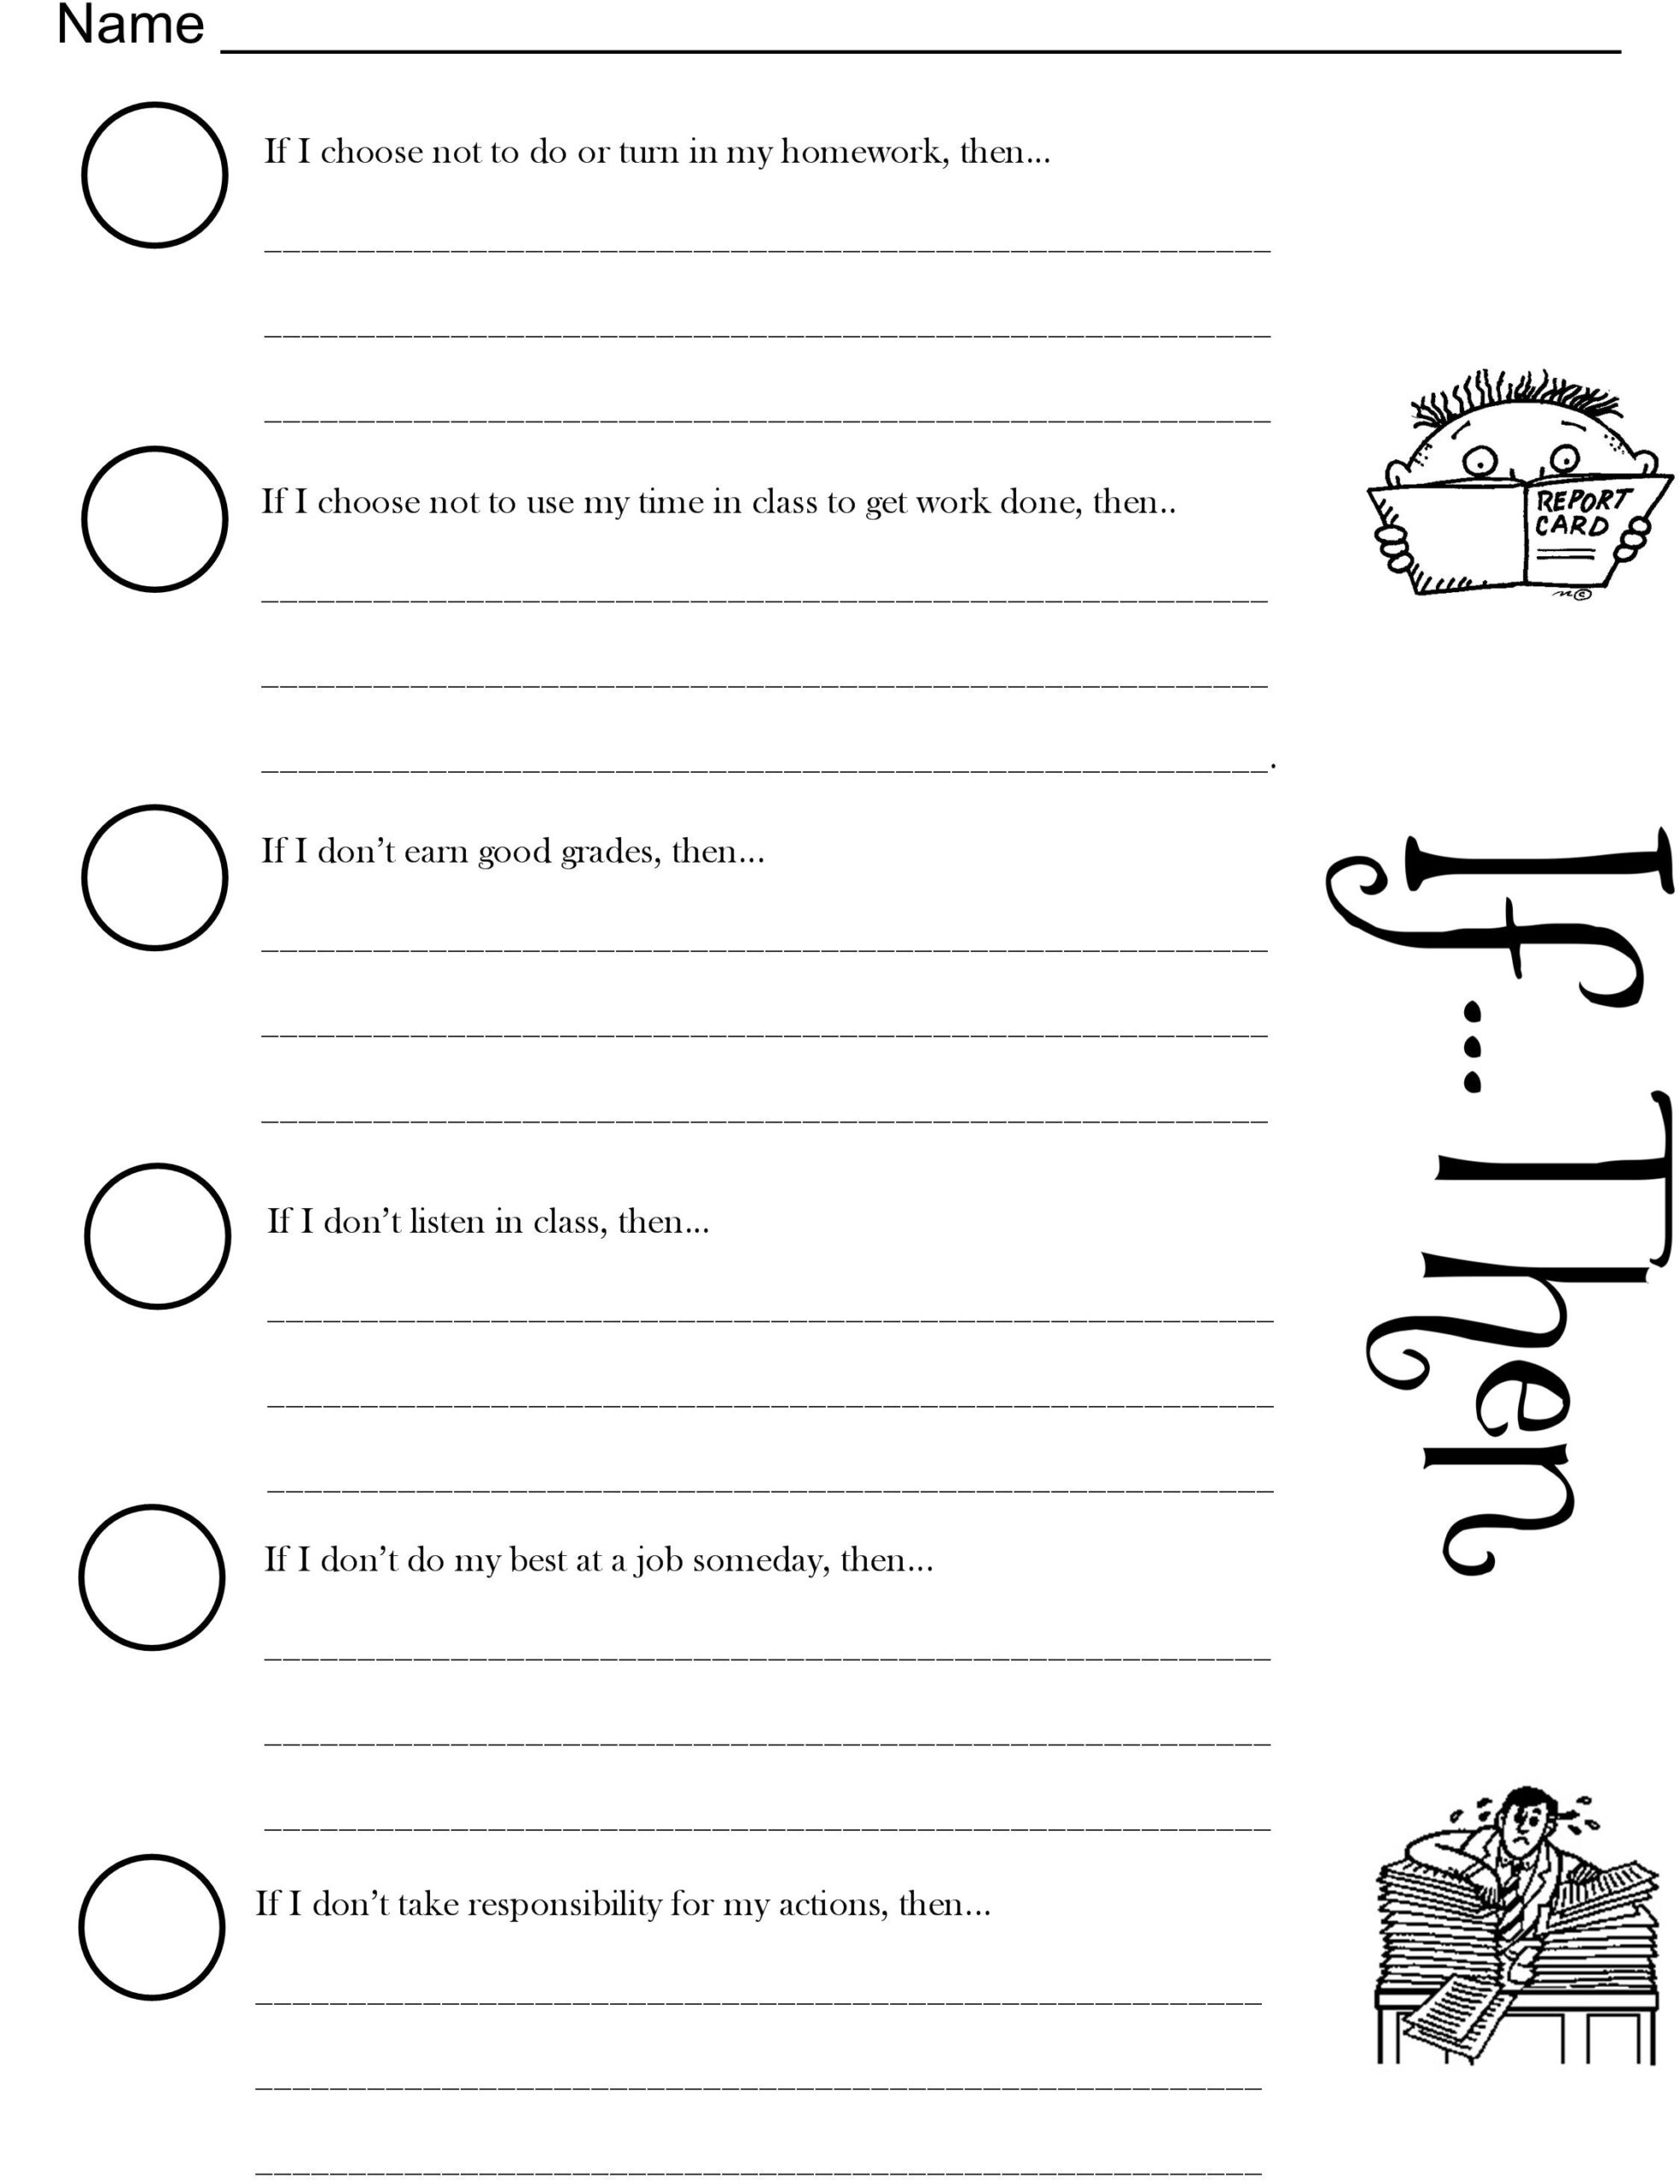 Worksheet For If Then understanding Consequences academic Domain Lesson Students Will Social Studies Worksheets Elementary Counseling Counseling Lessons